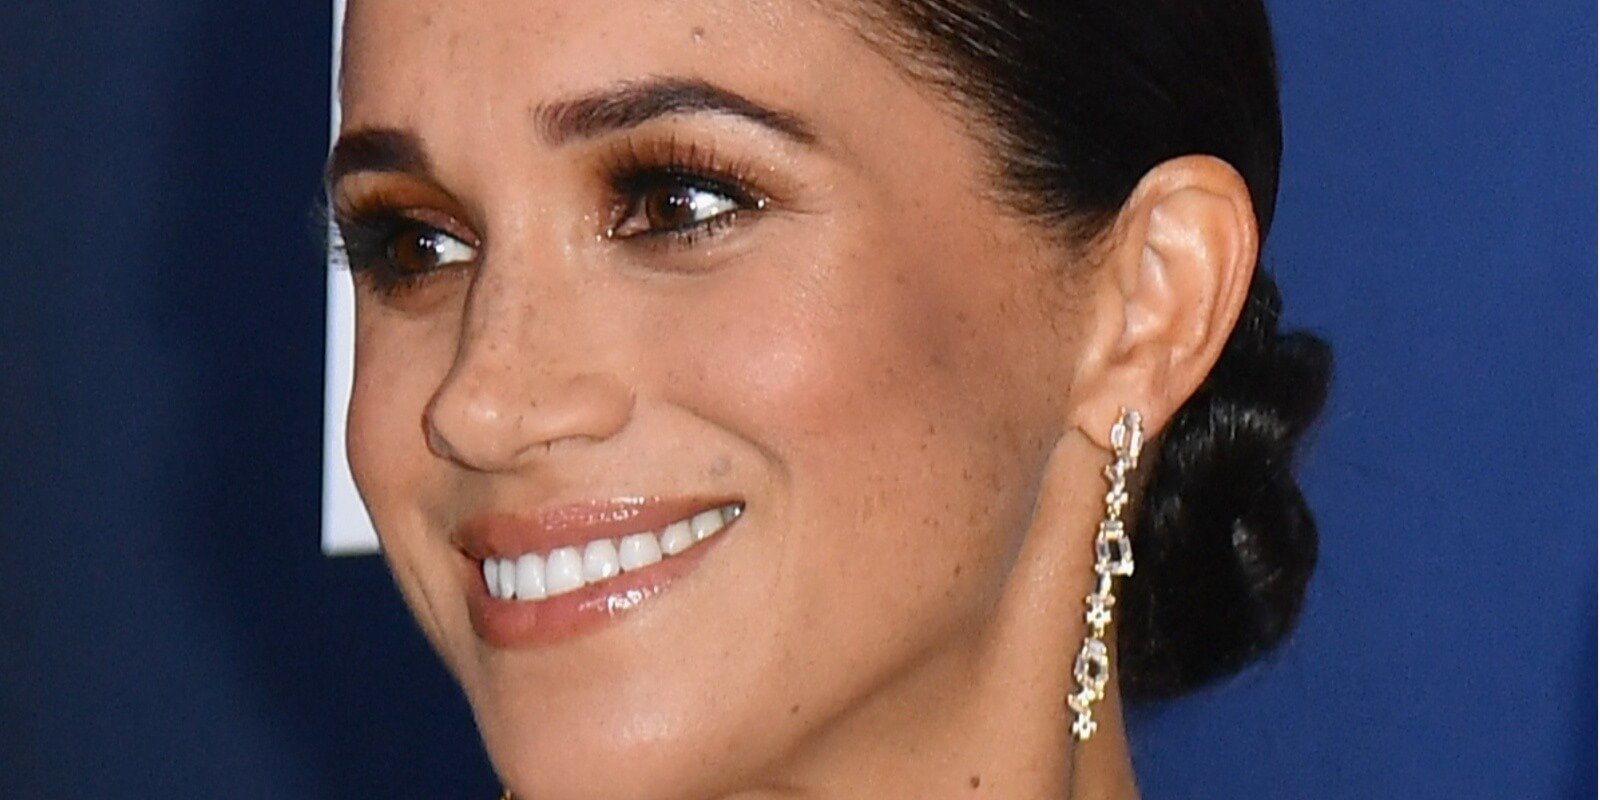 Meghan Markle is trying to be an influencer says a royal commentator.